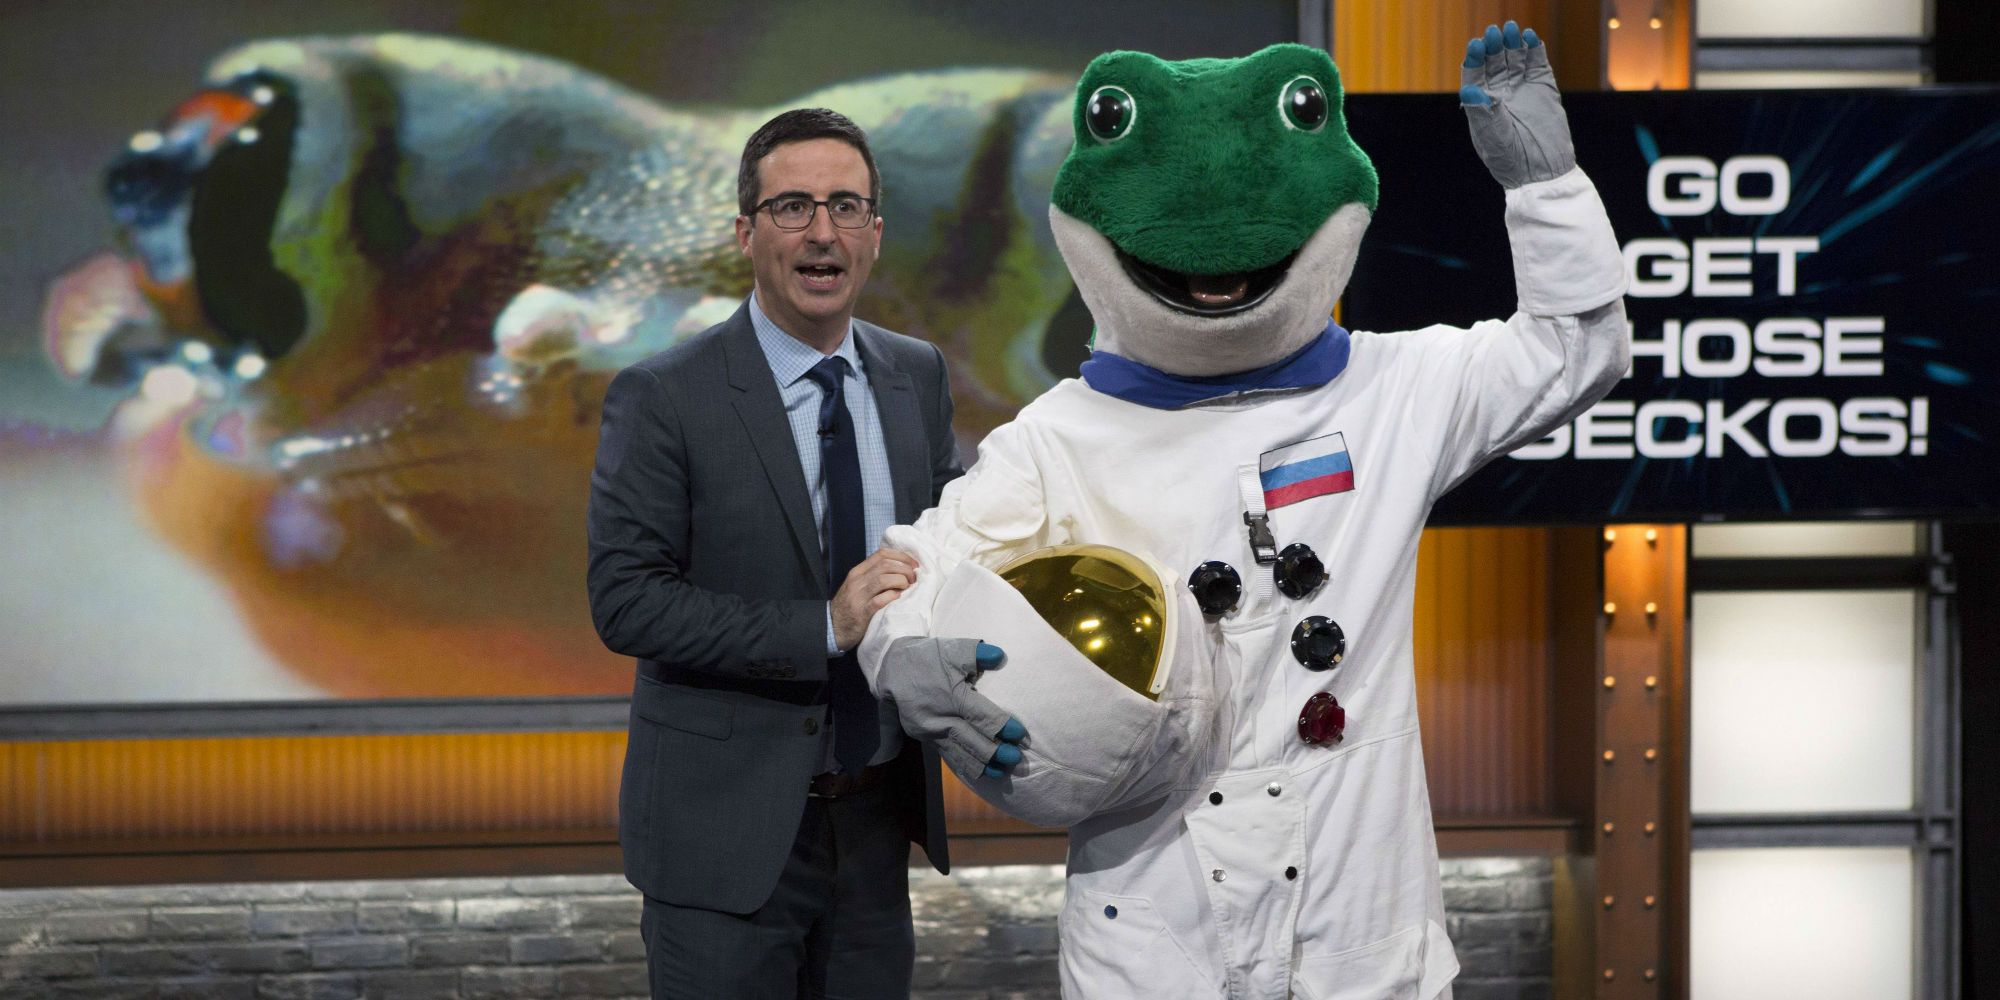 When Does Last Week Tonight with John Oliver Return?